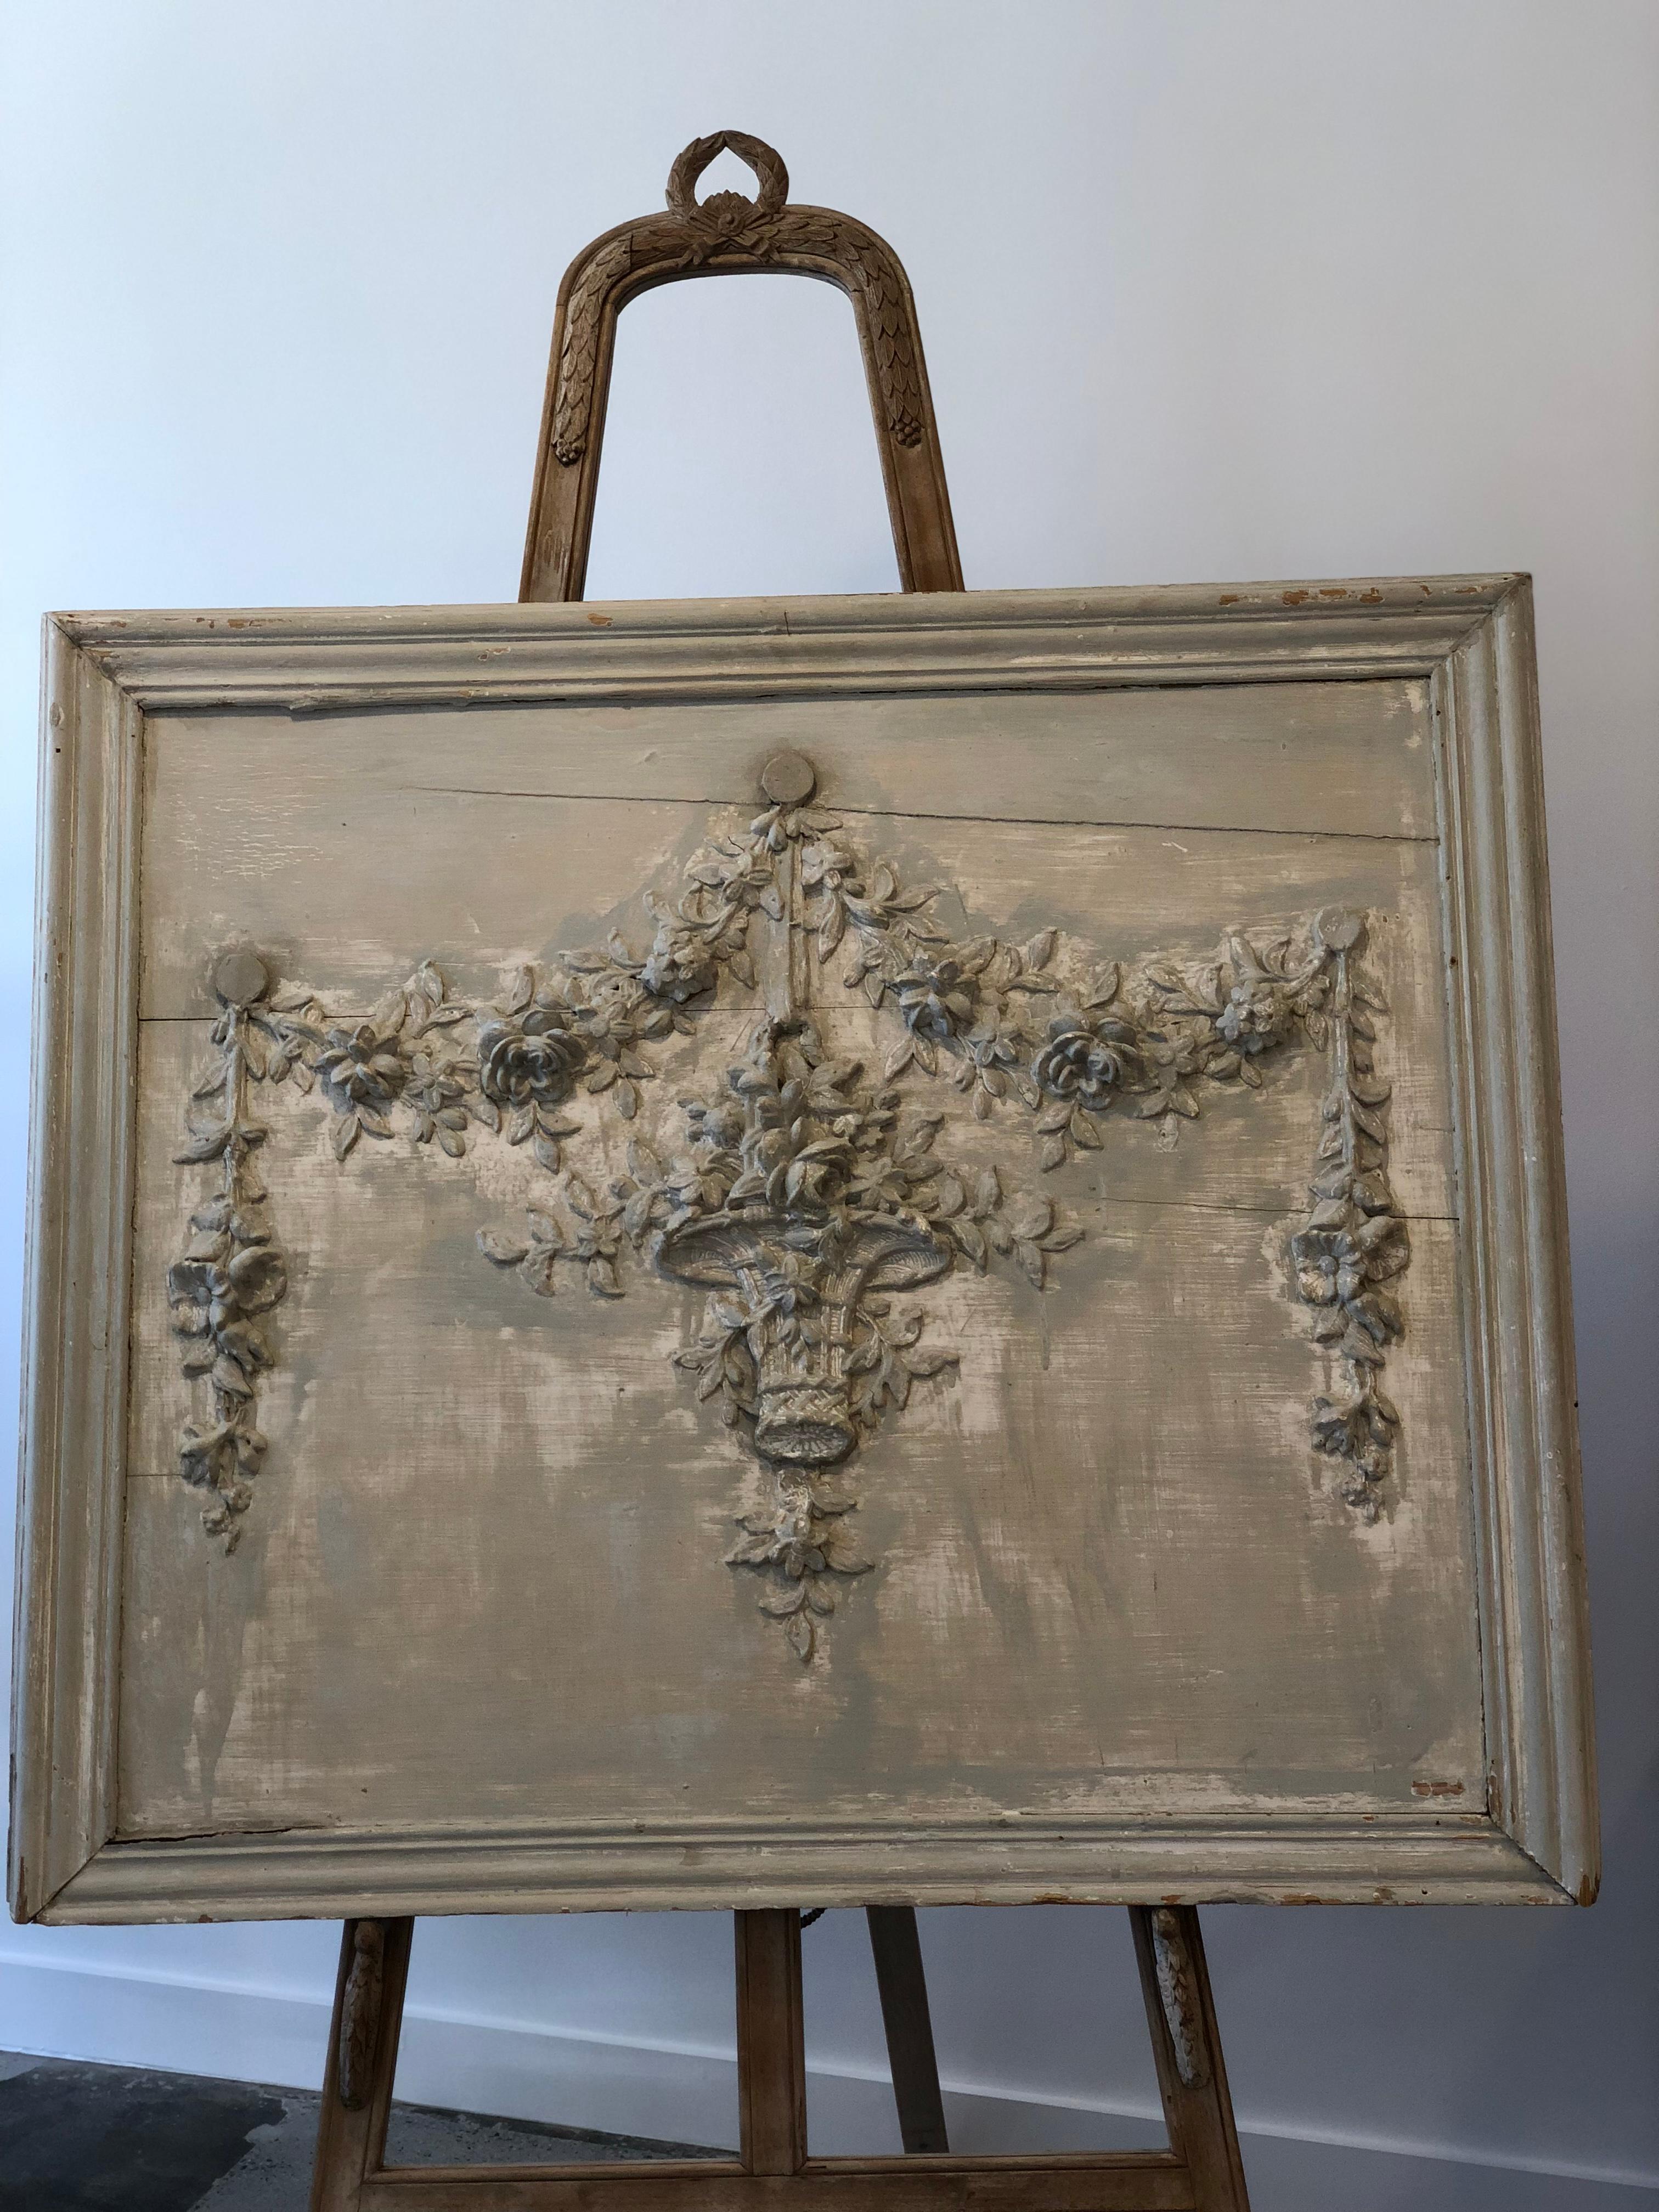 This lovely French carved board depicts a lovely basket with overflowing garlands. It is set on wood backboard. It is very textural piece that would be a nice backdrop in a variety of rooms. The color is a very soft faded mint green with hints of